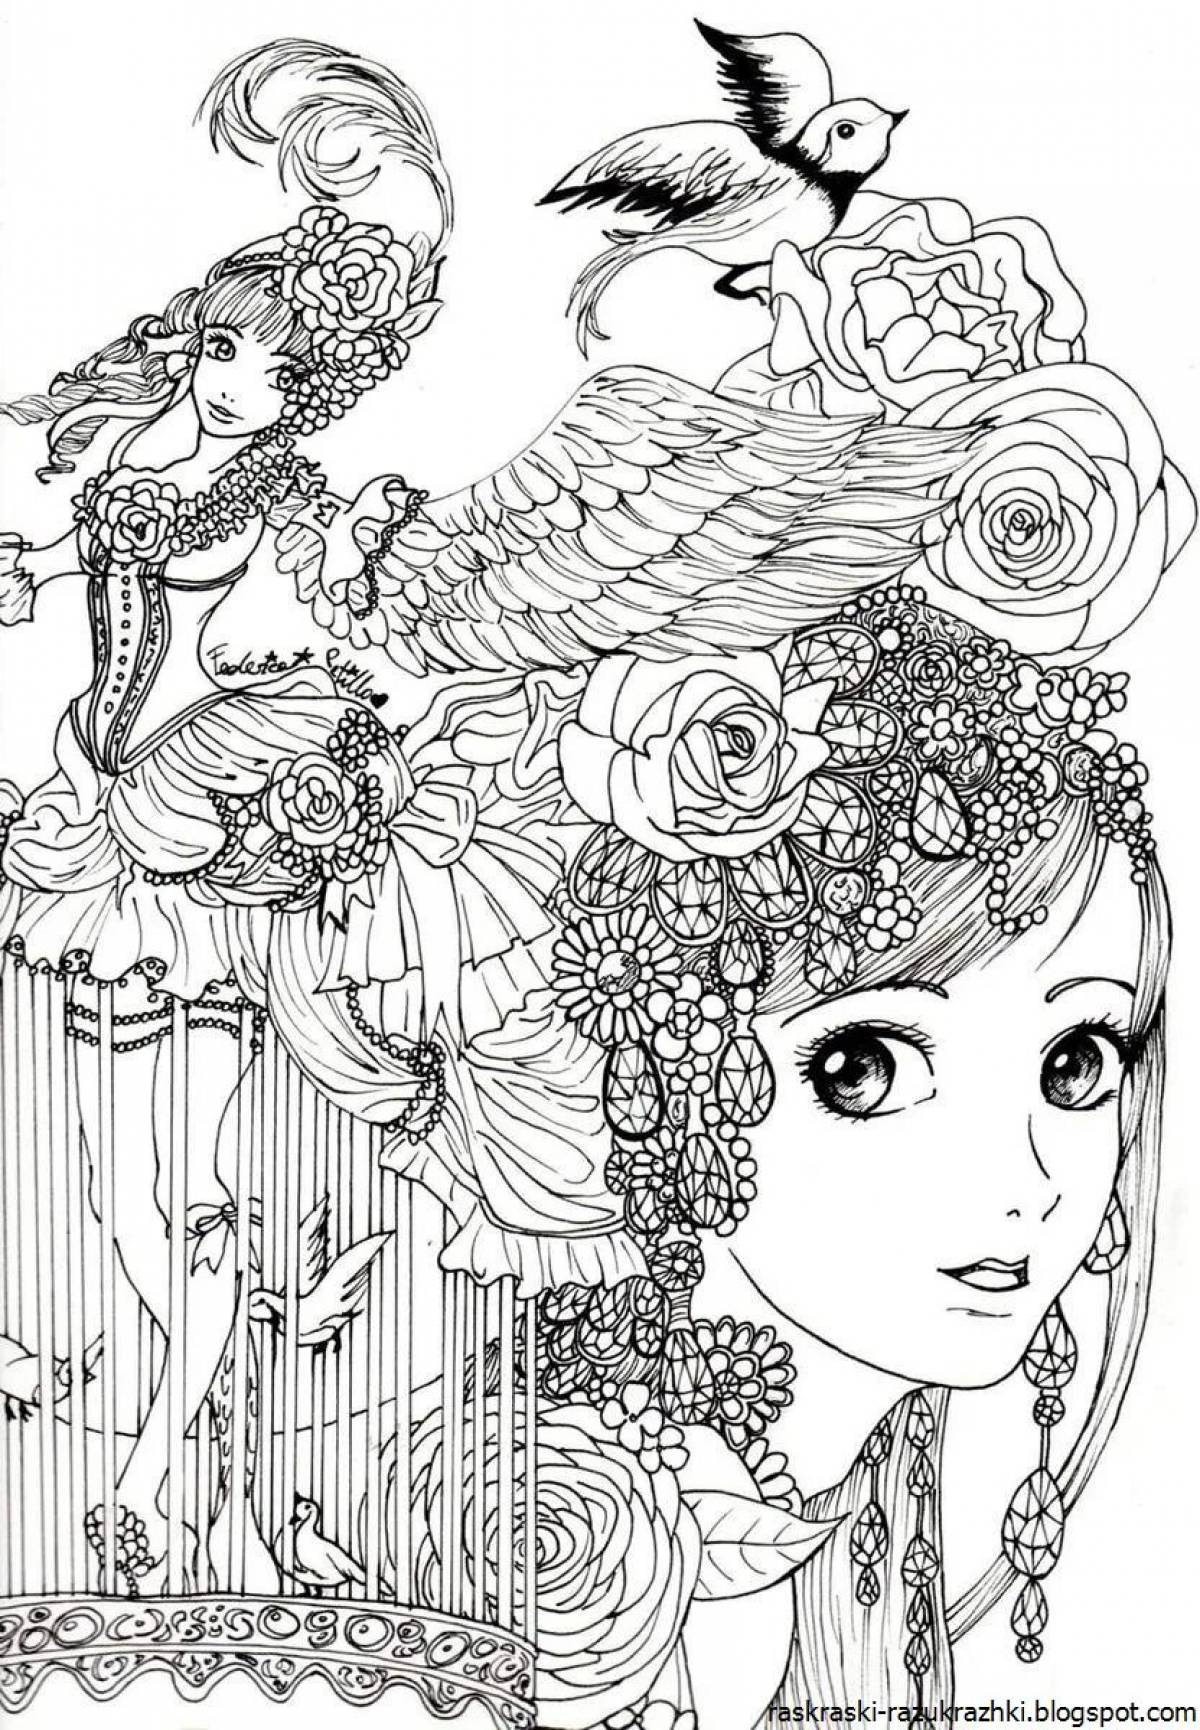 Bright adult coloring page